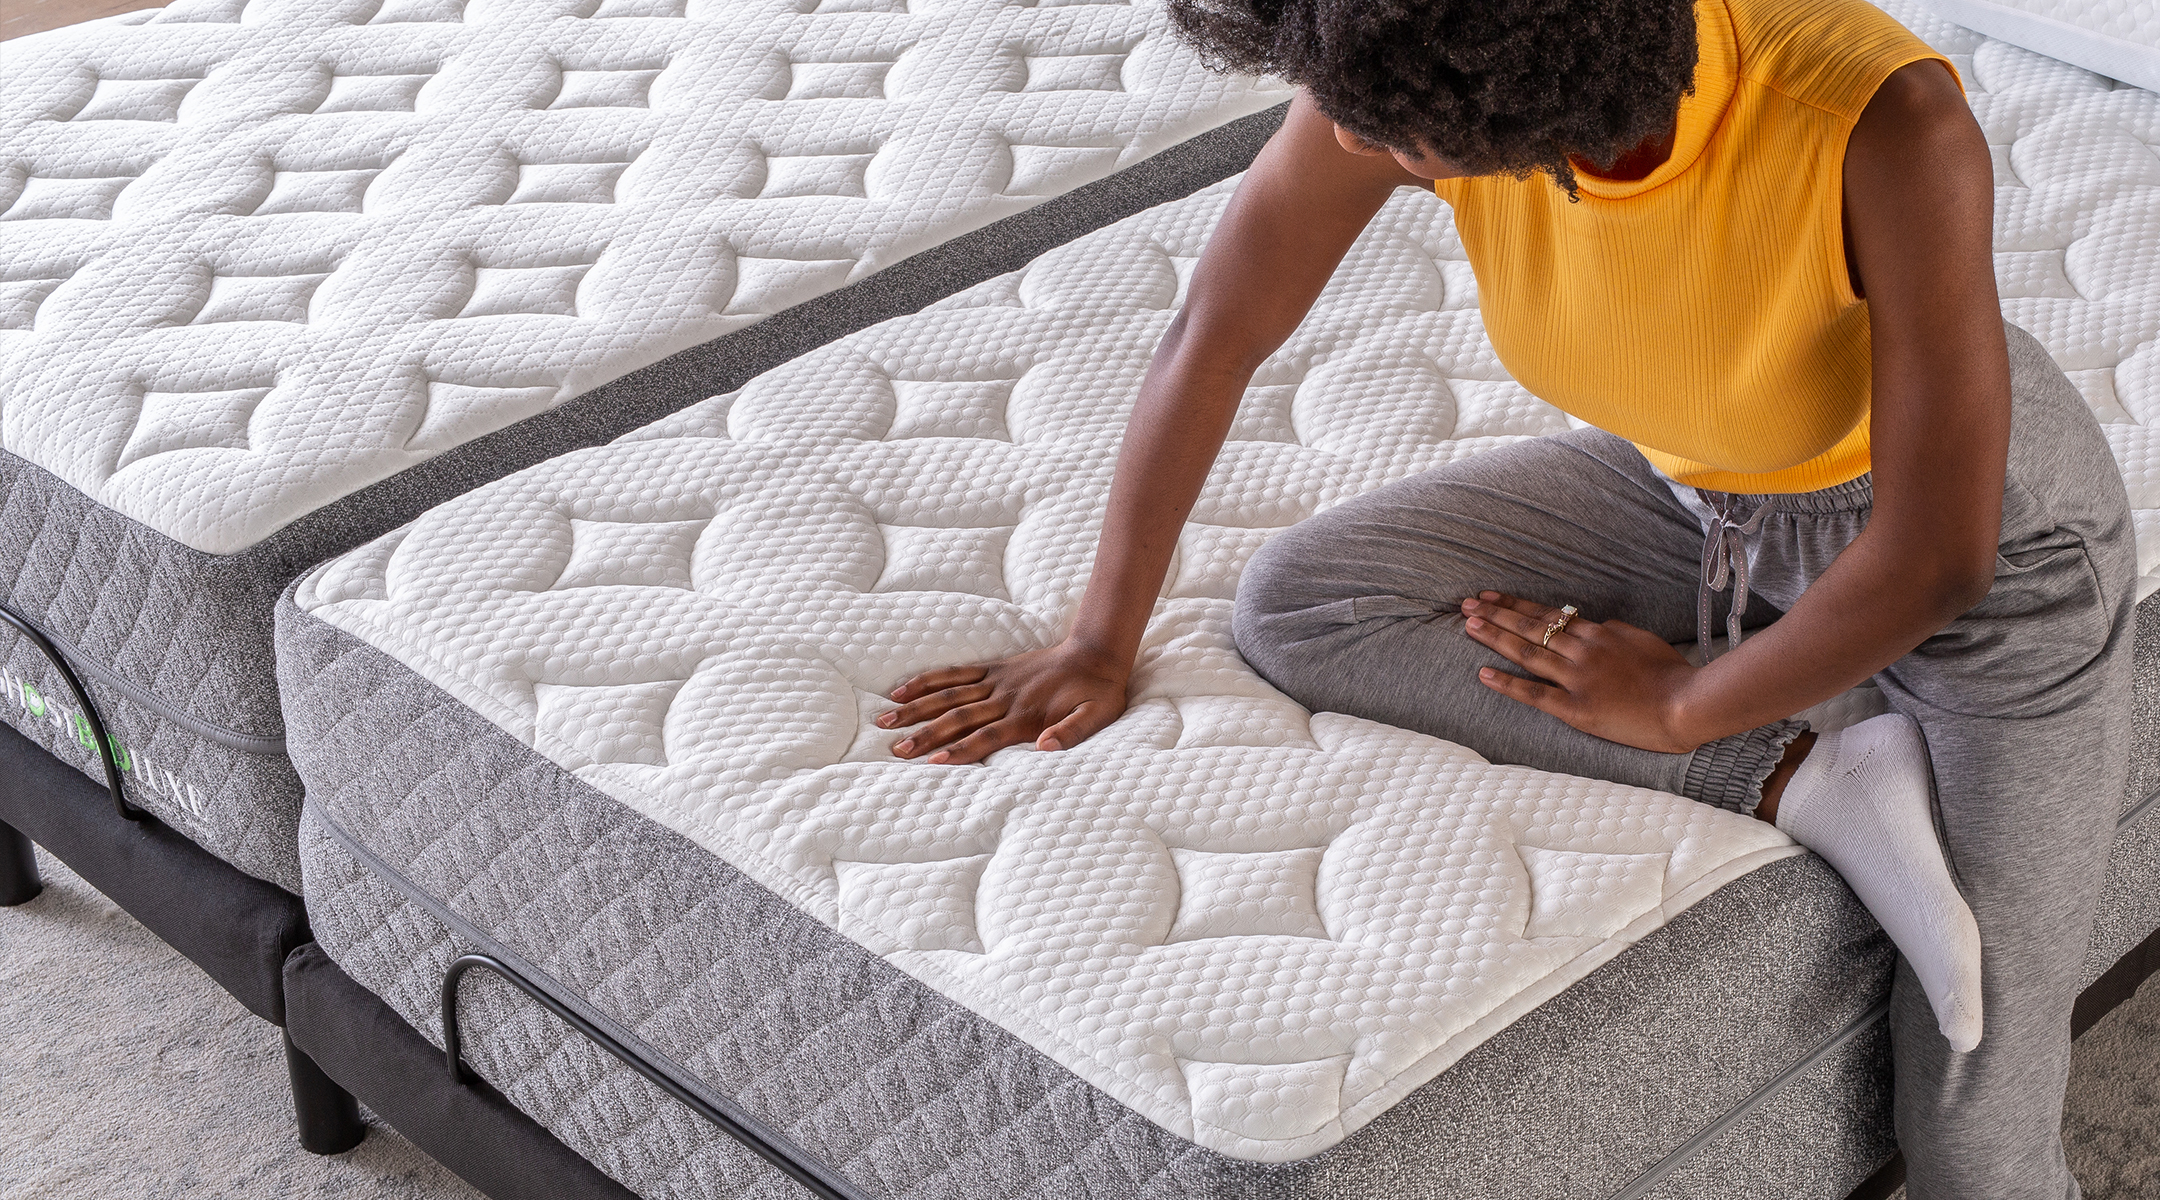 GhostBed uses high-density foam as the base layer for all of its beds for a more supportive mattress.